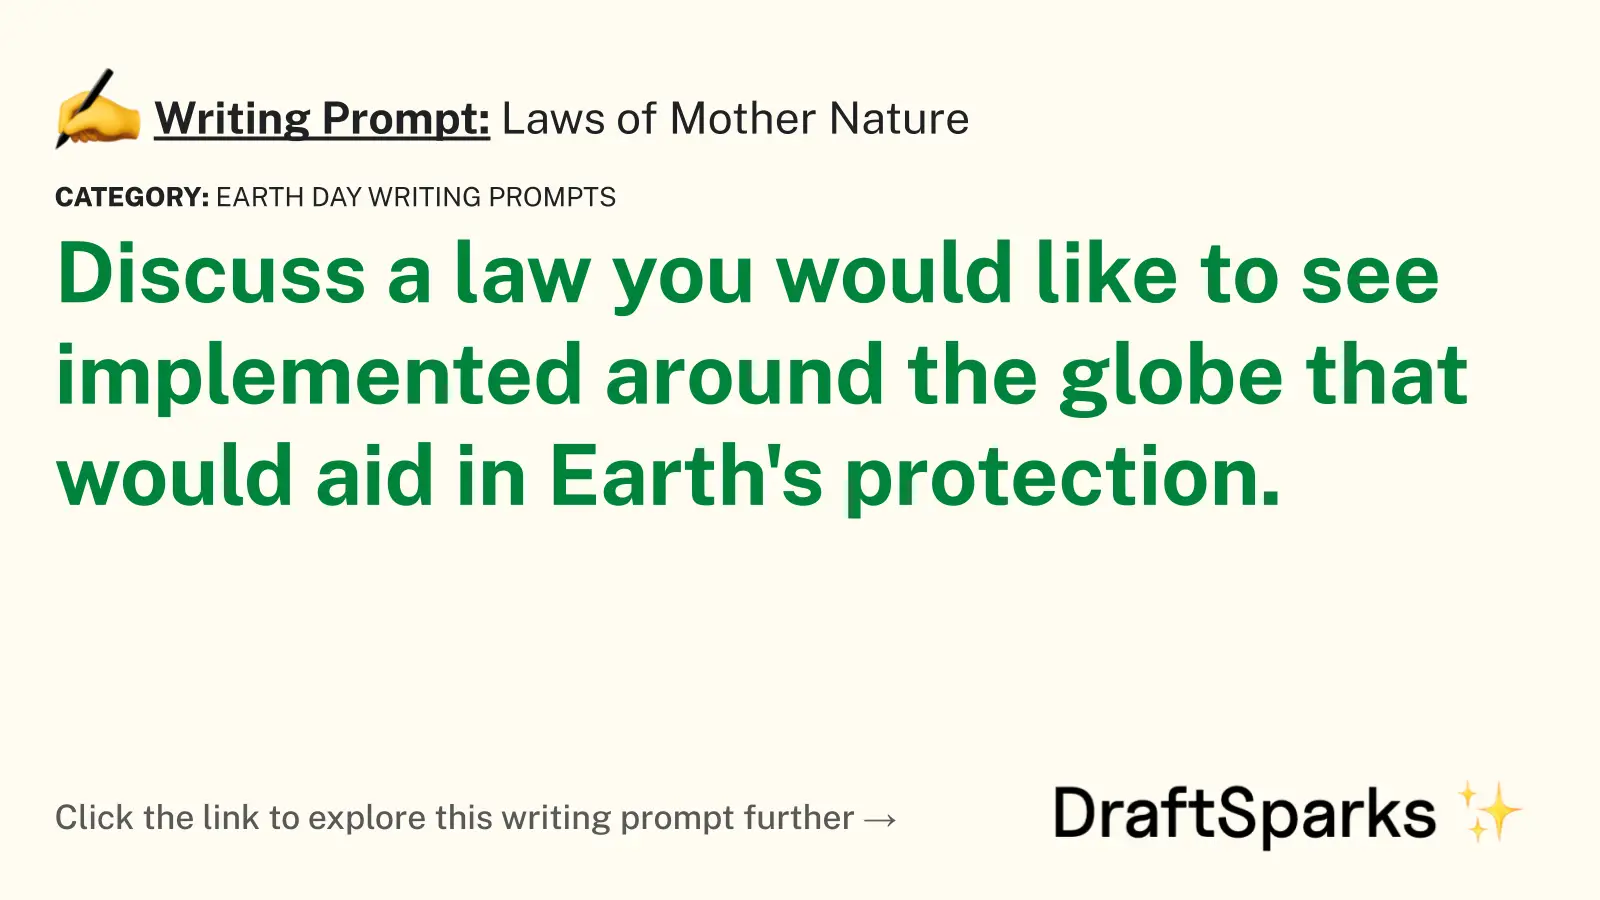 Laws of Mother Nature